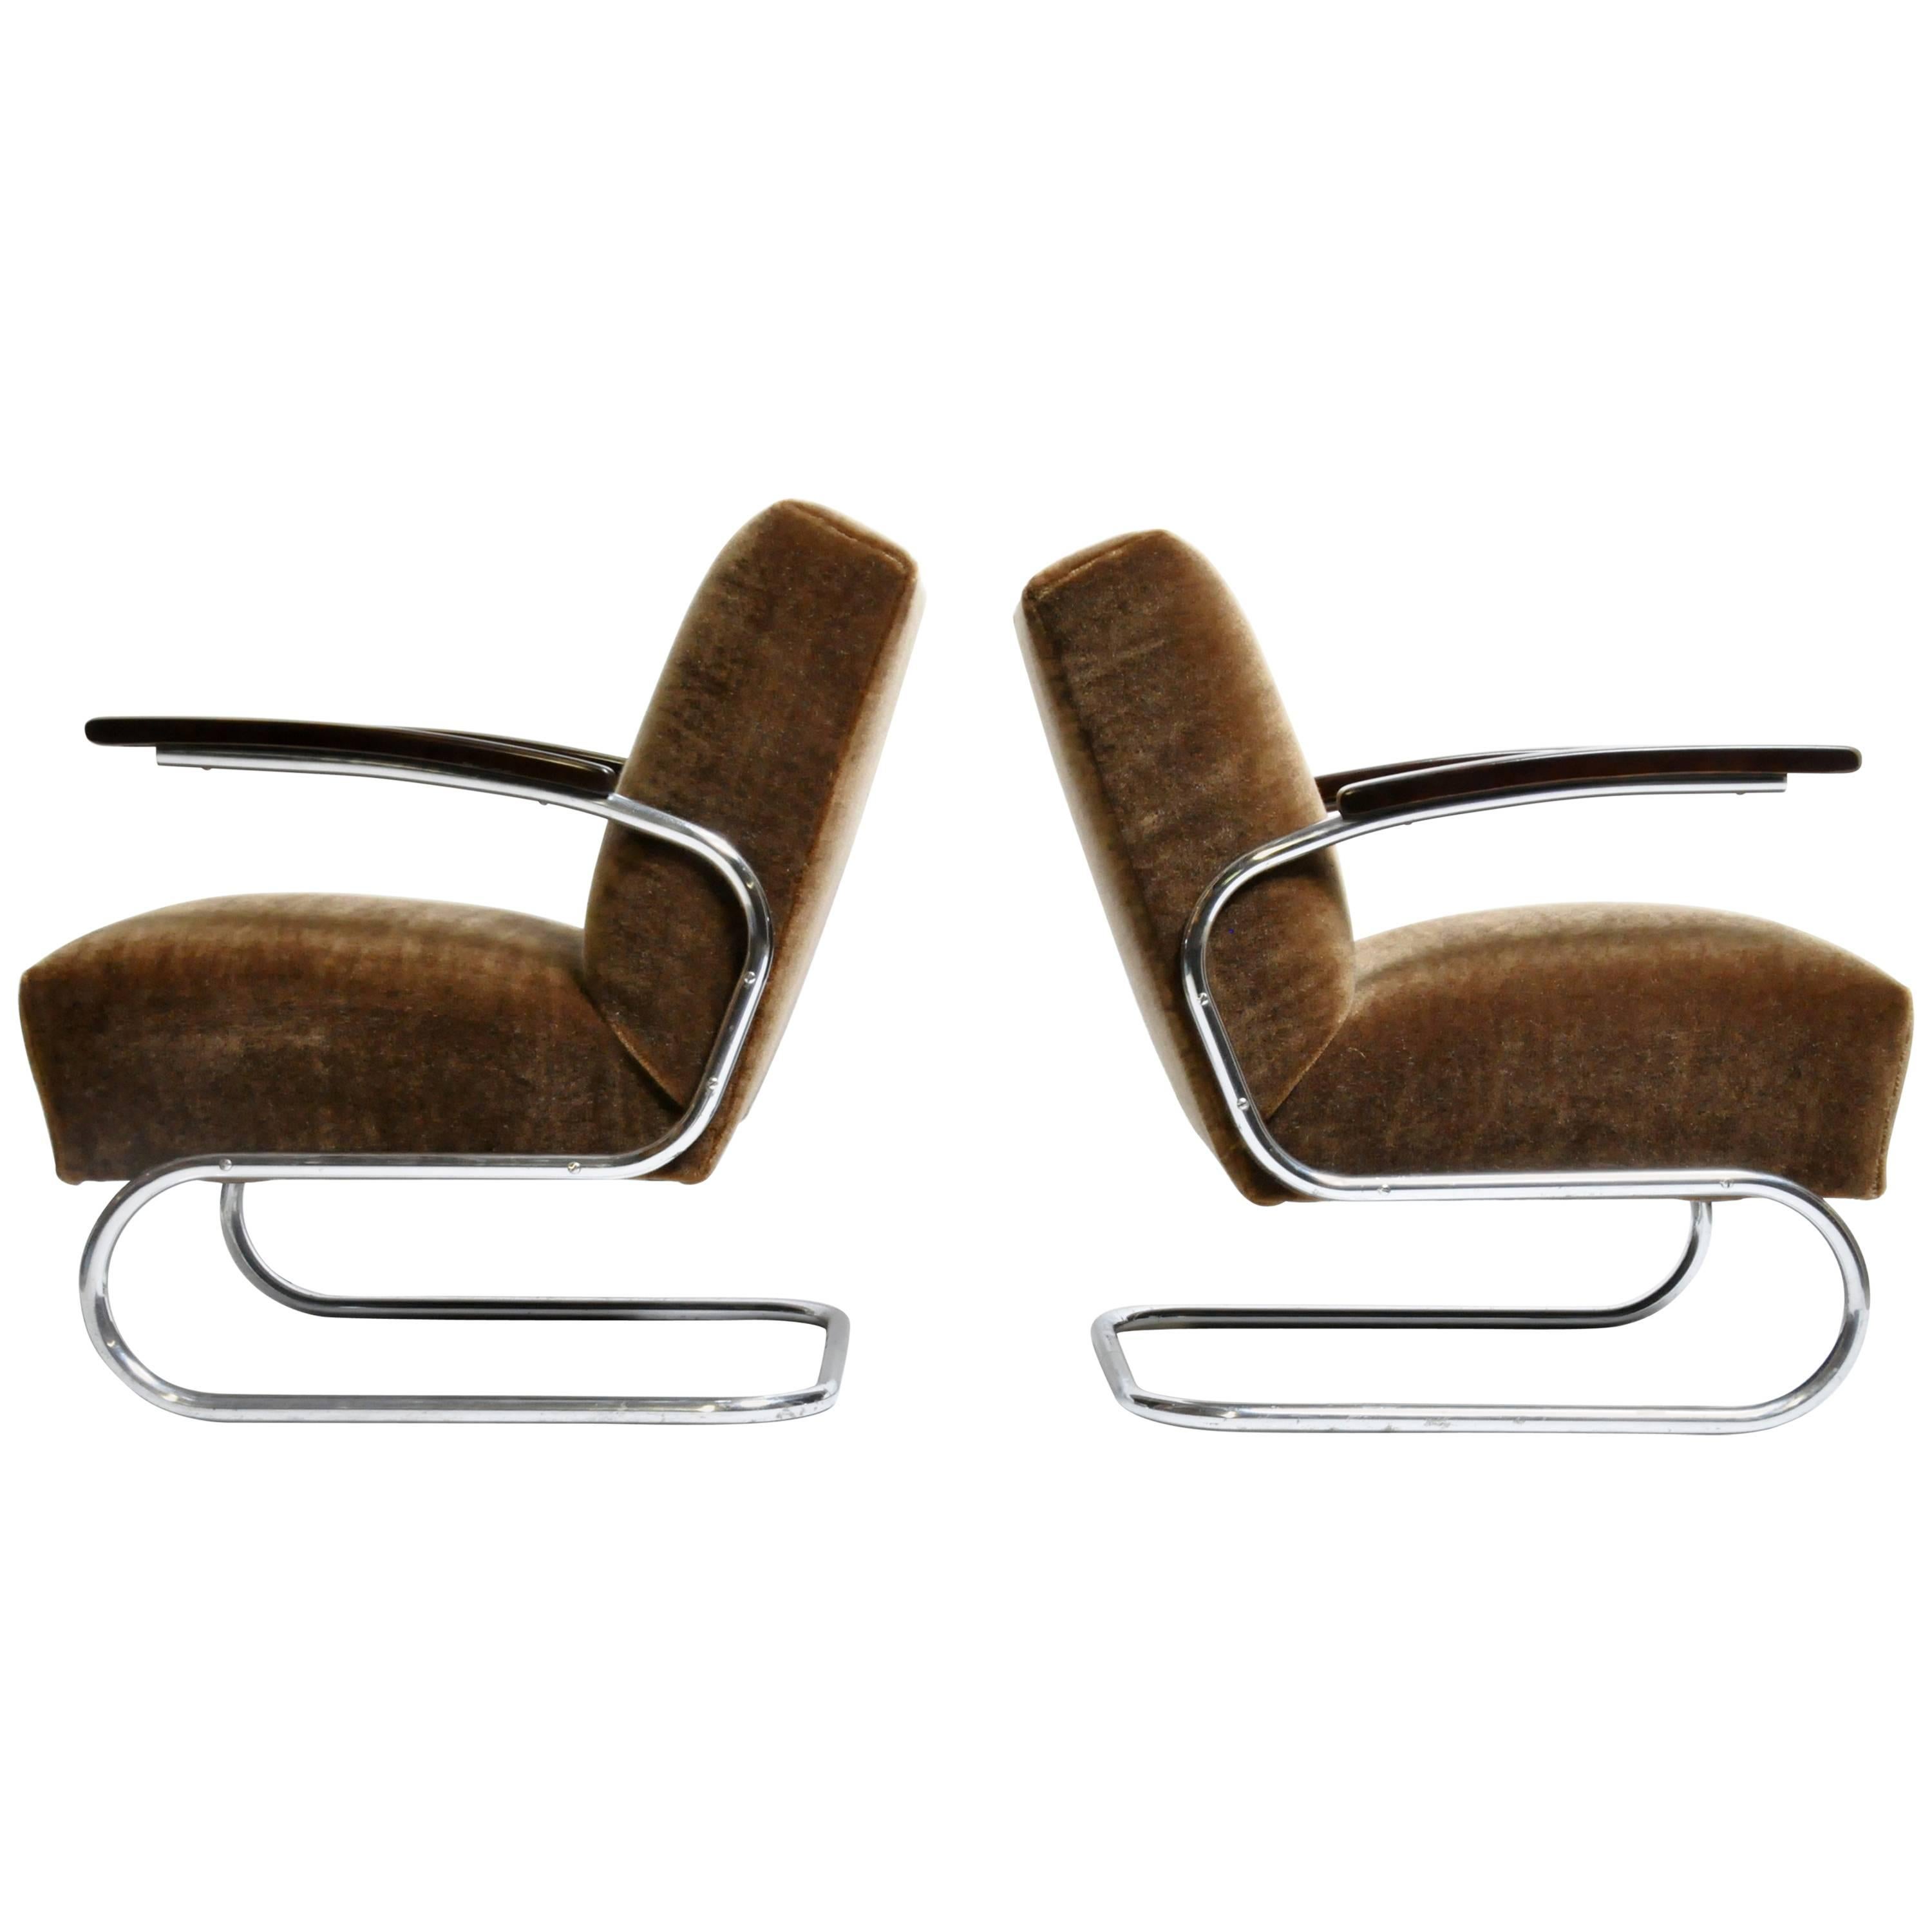 Pair of Chairs with Curved Chrome Legs